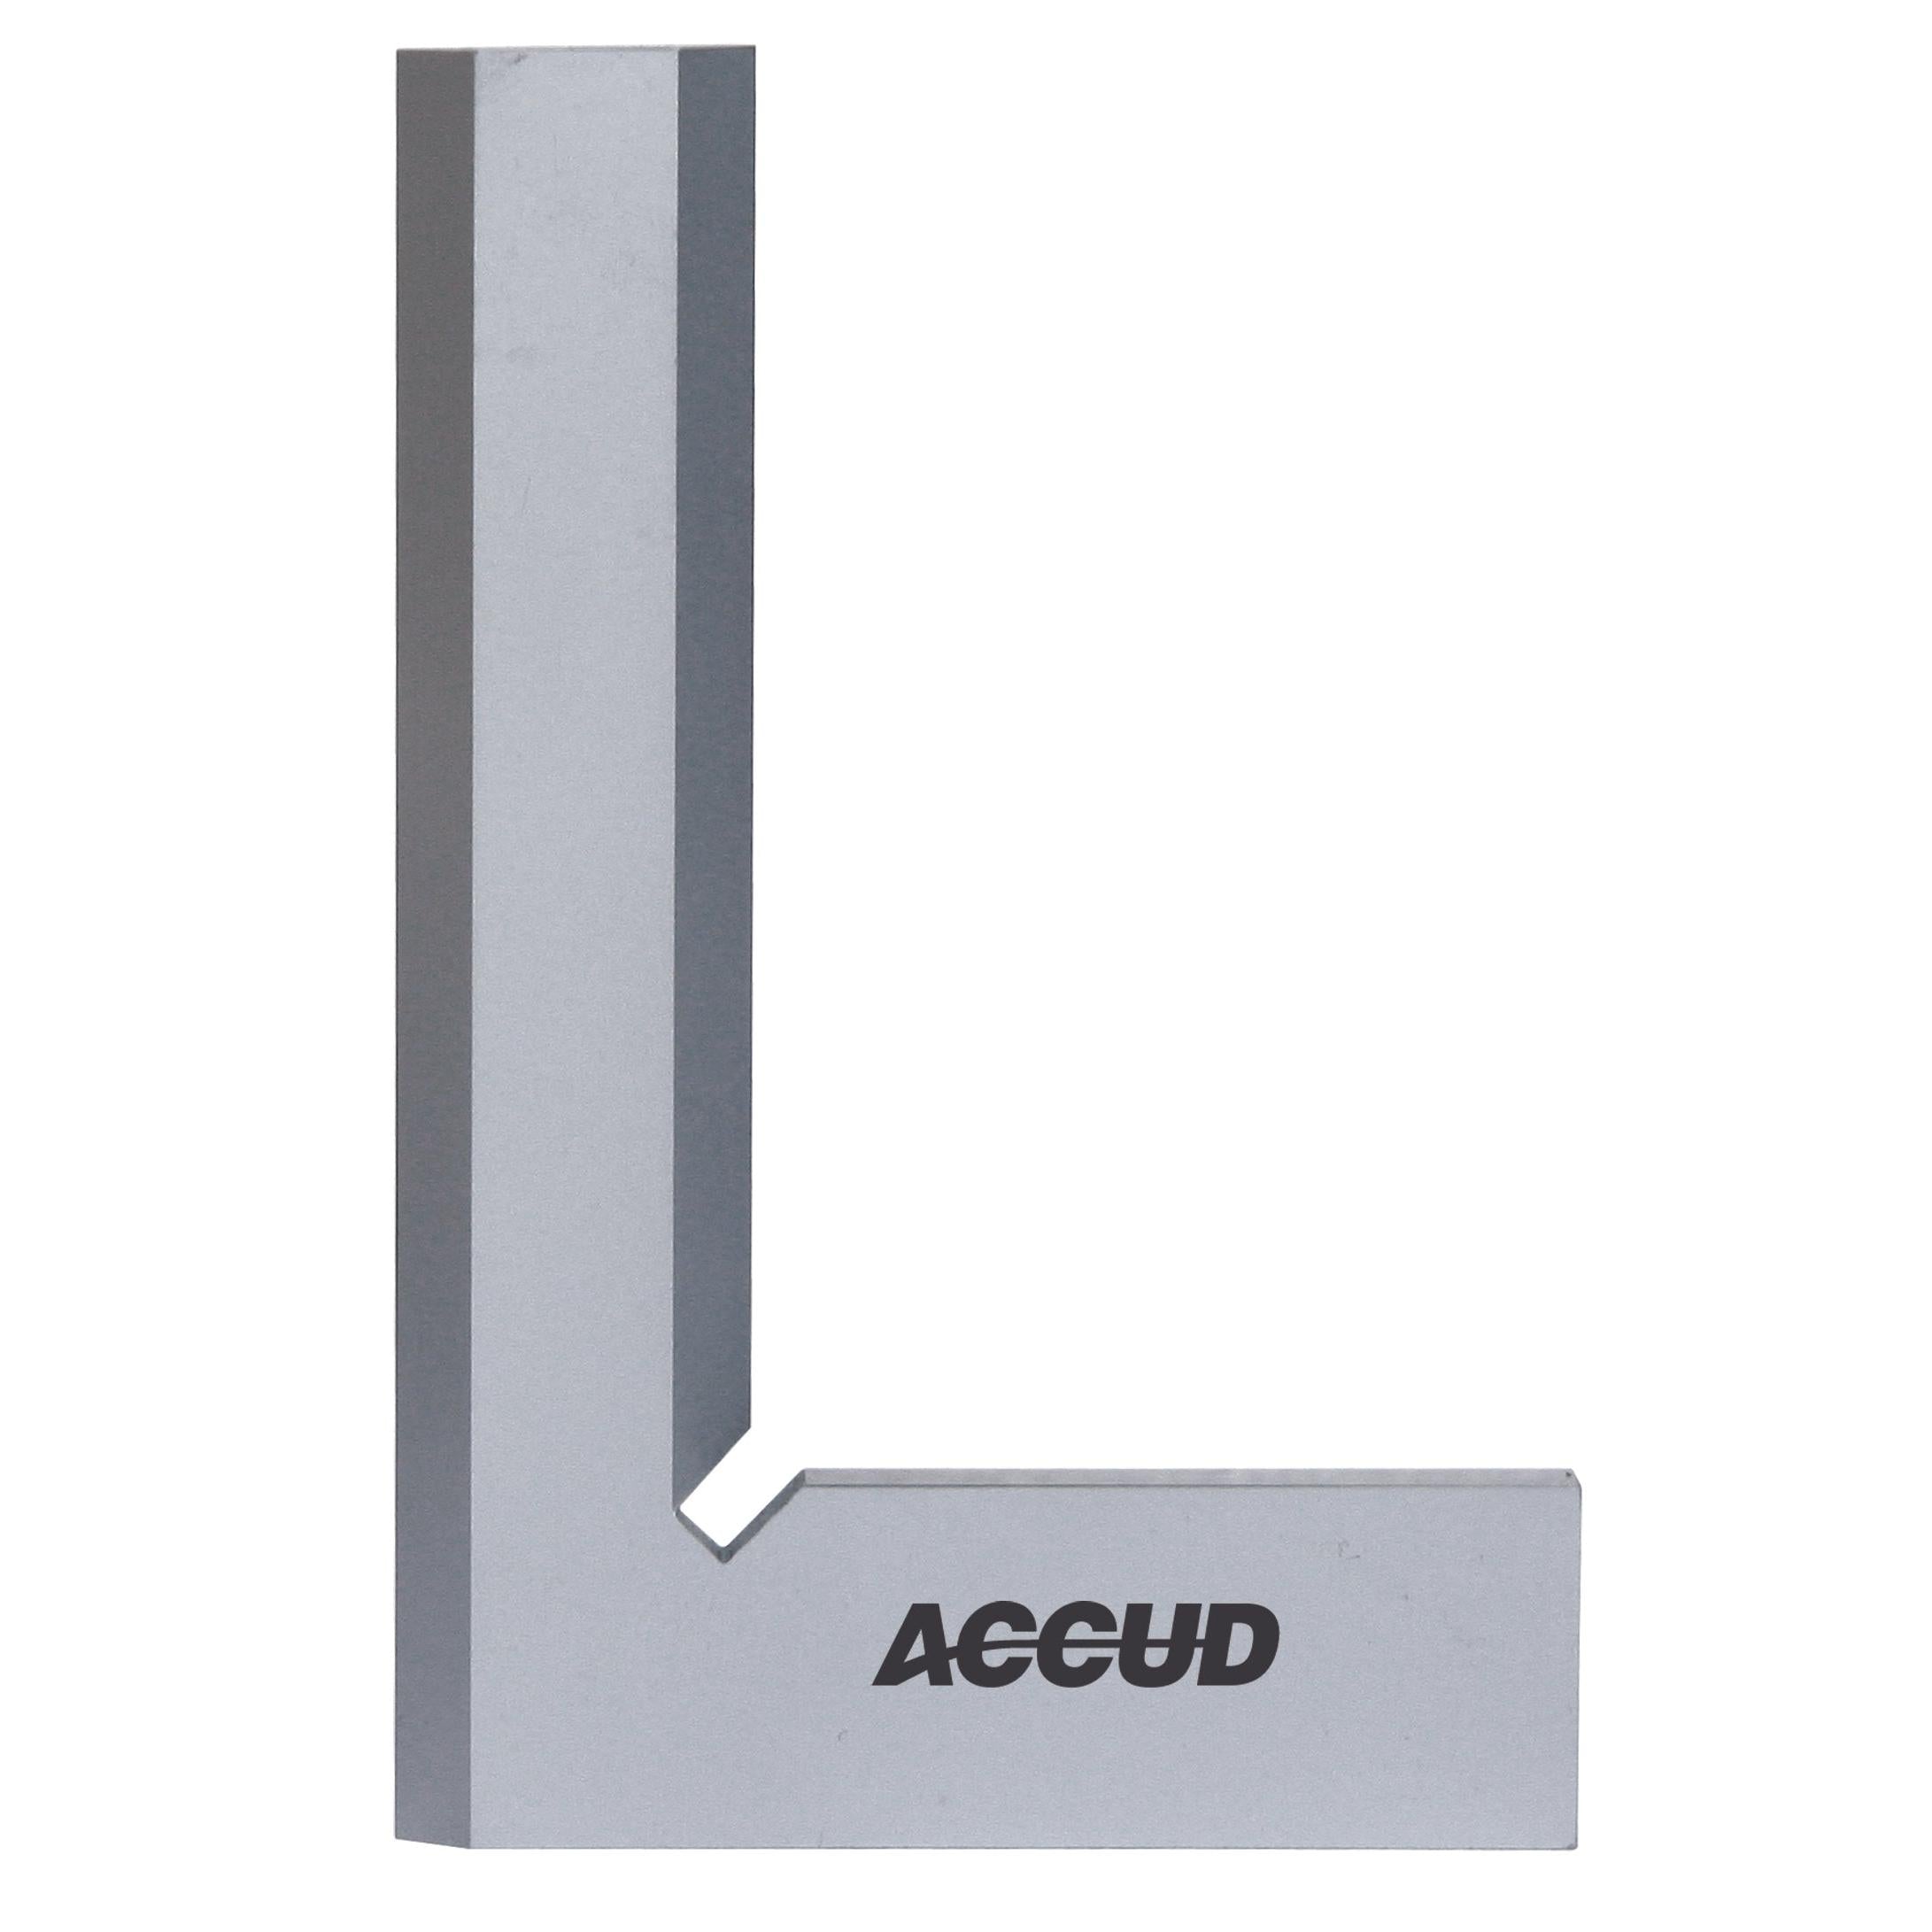 ACCUD | Beveled Edge Square 150X100Mm | 832-006-00 Power Tool Services